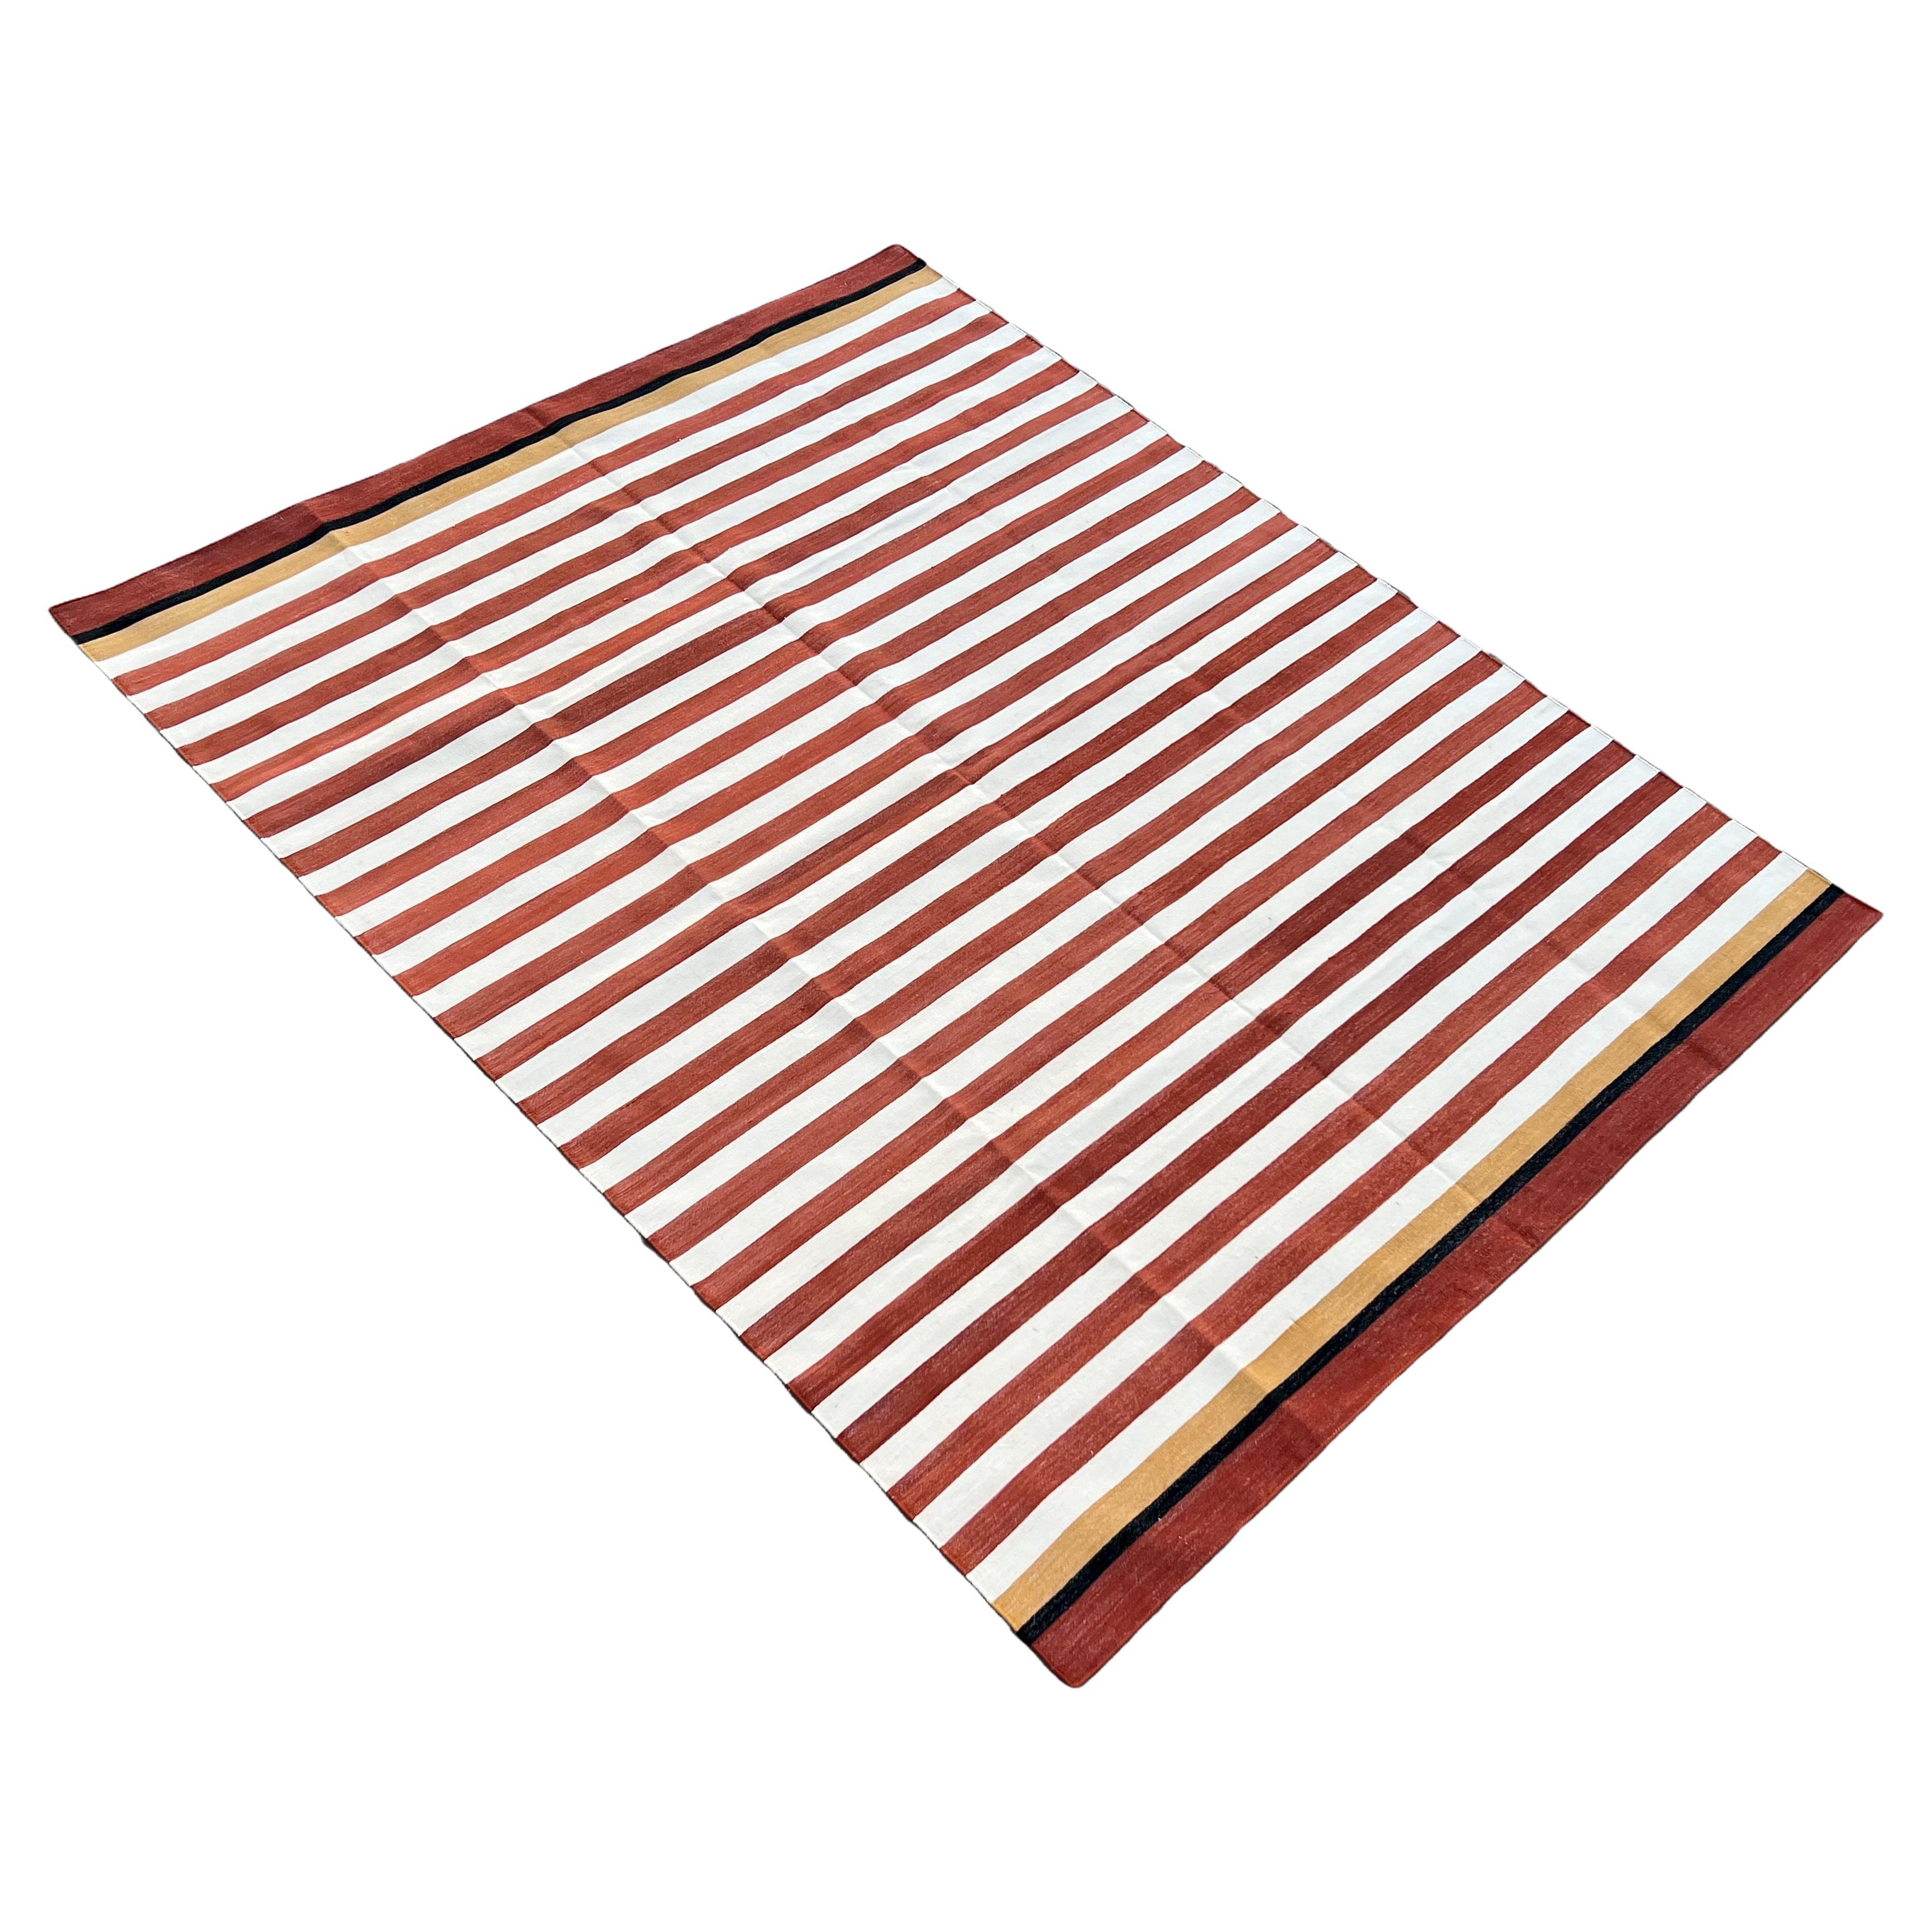 Handmade Cotton Area Flat Weave Rug, 6x9 Red And White Stripe Indian Dhurrie Rug